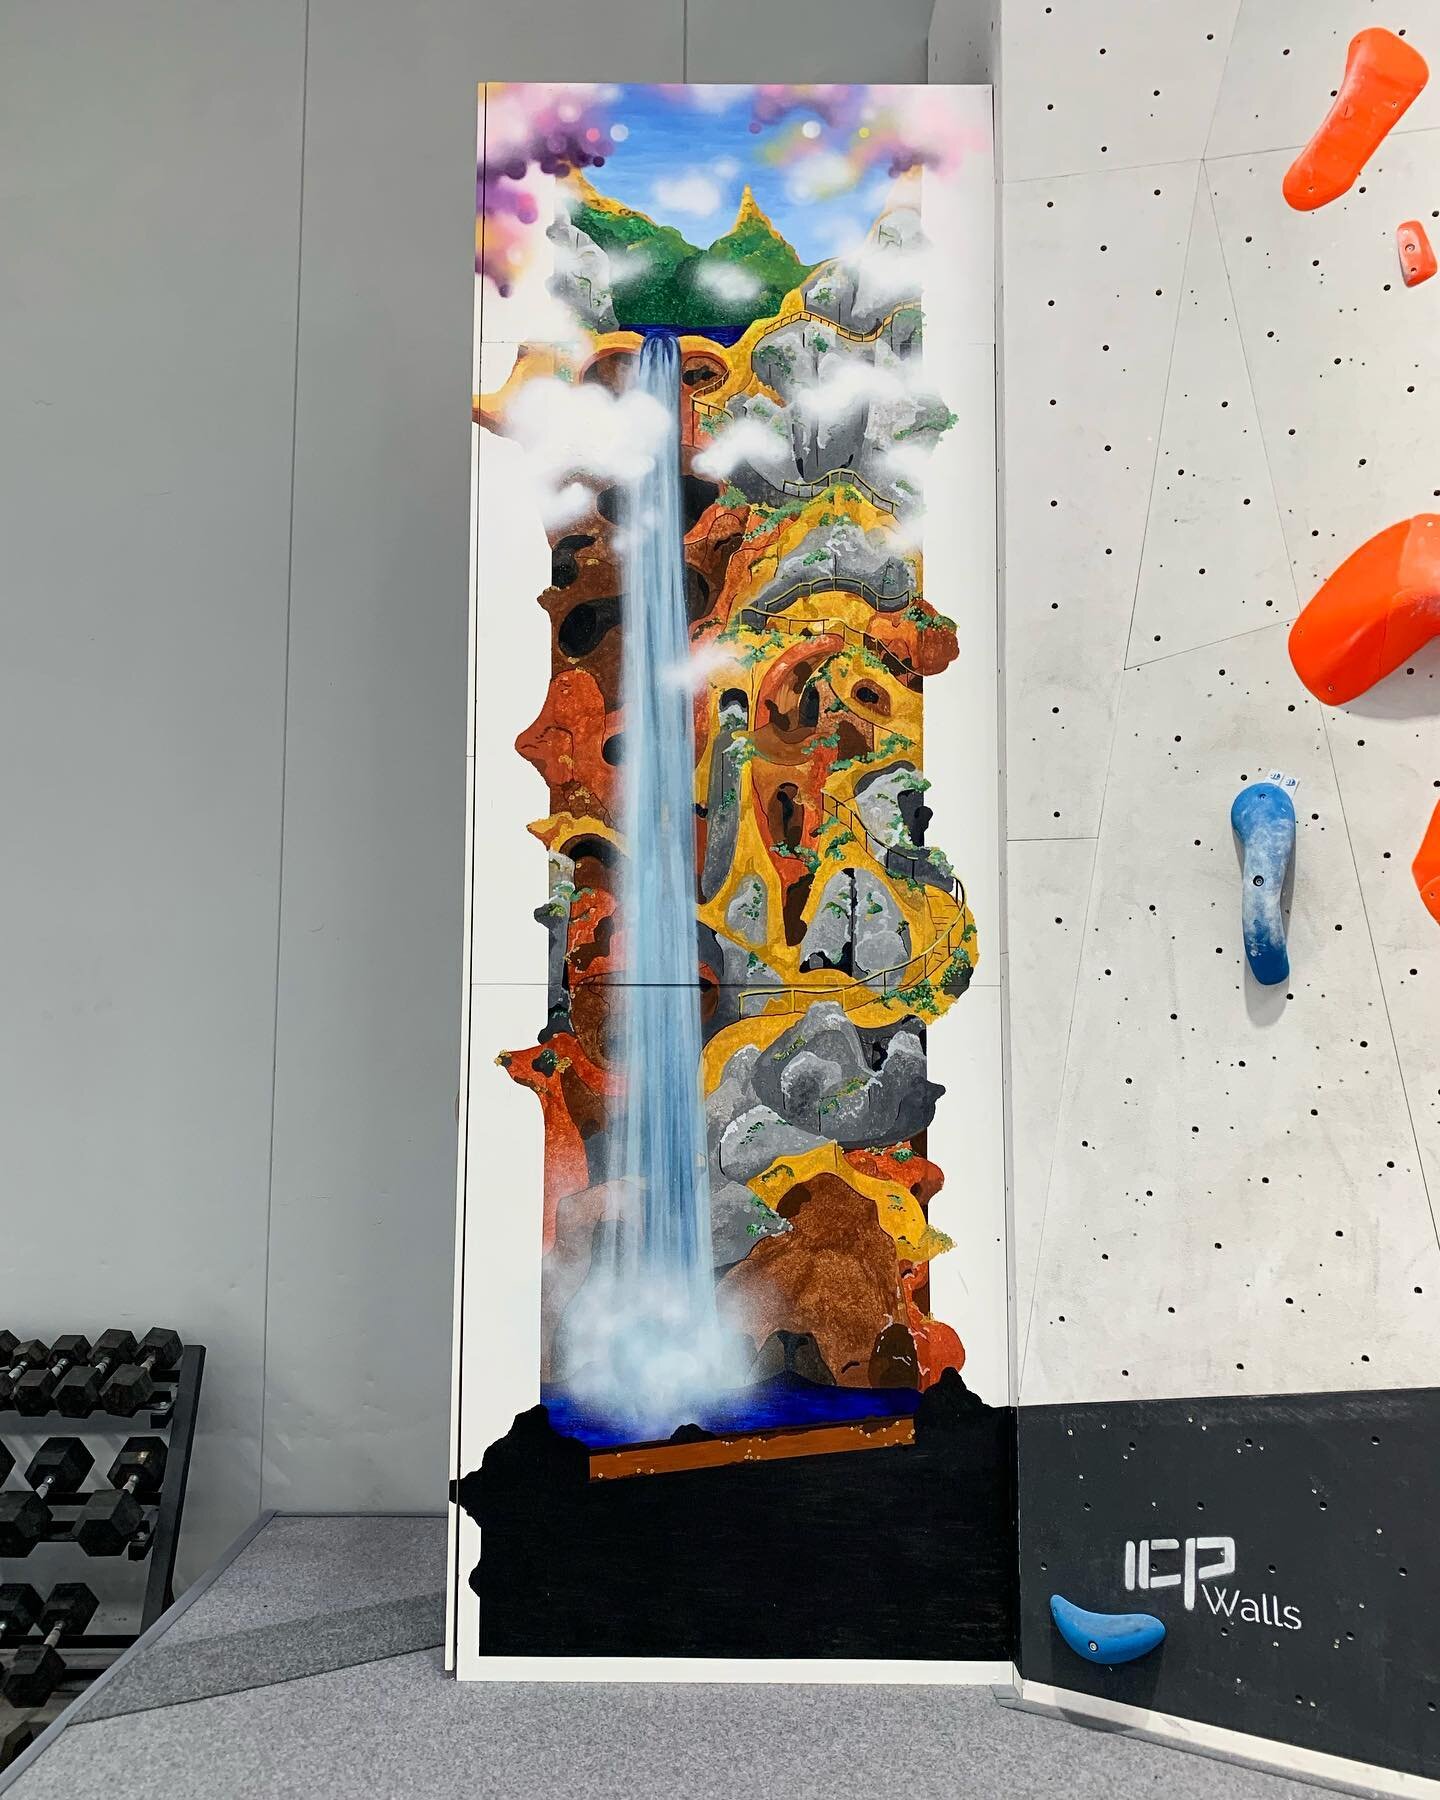 Wow, @joeymills_art you have done it again!! 😍

.
.
.
#1UpBouldering #Art